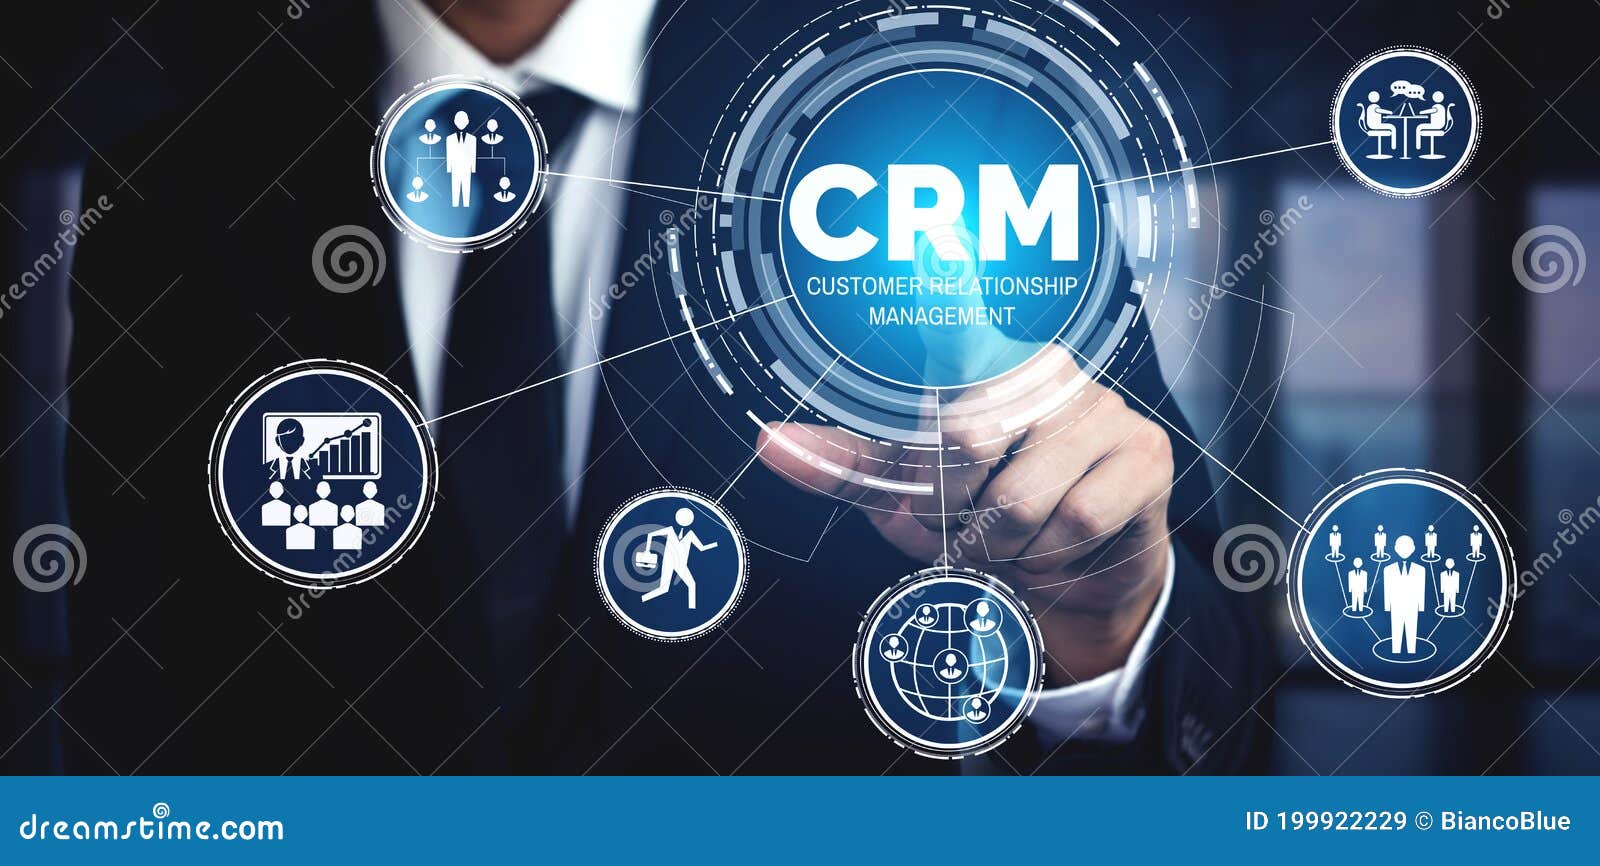 concept of crm in marketing